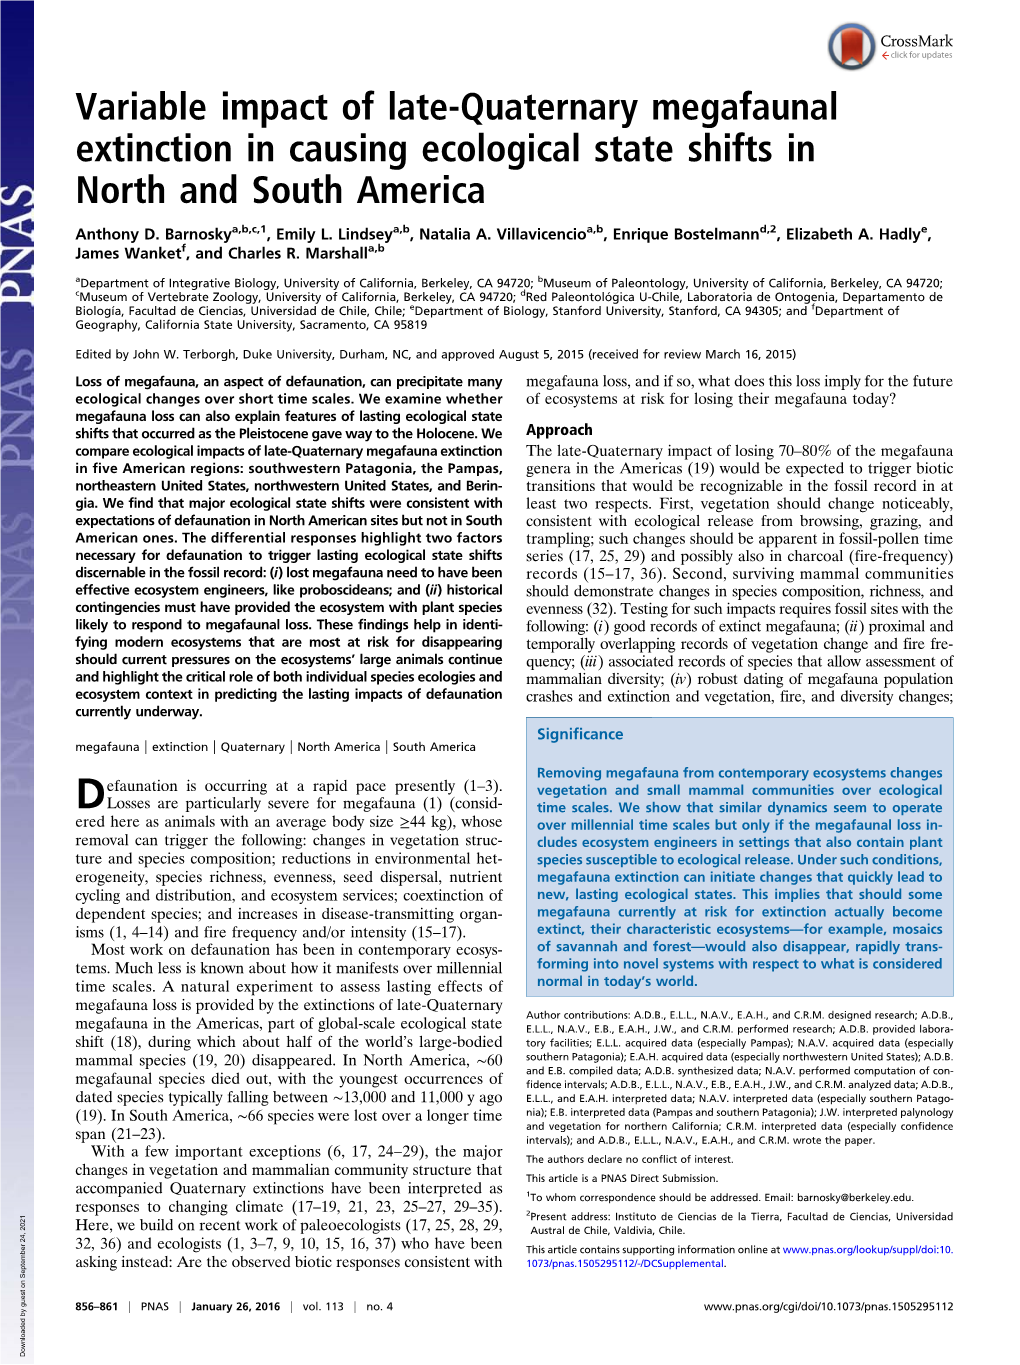 Variable Impact of Late-Quaternary Megafaunal Extinction in Causing Ecological State Shifts in North and South America